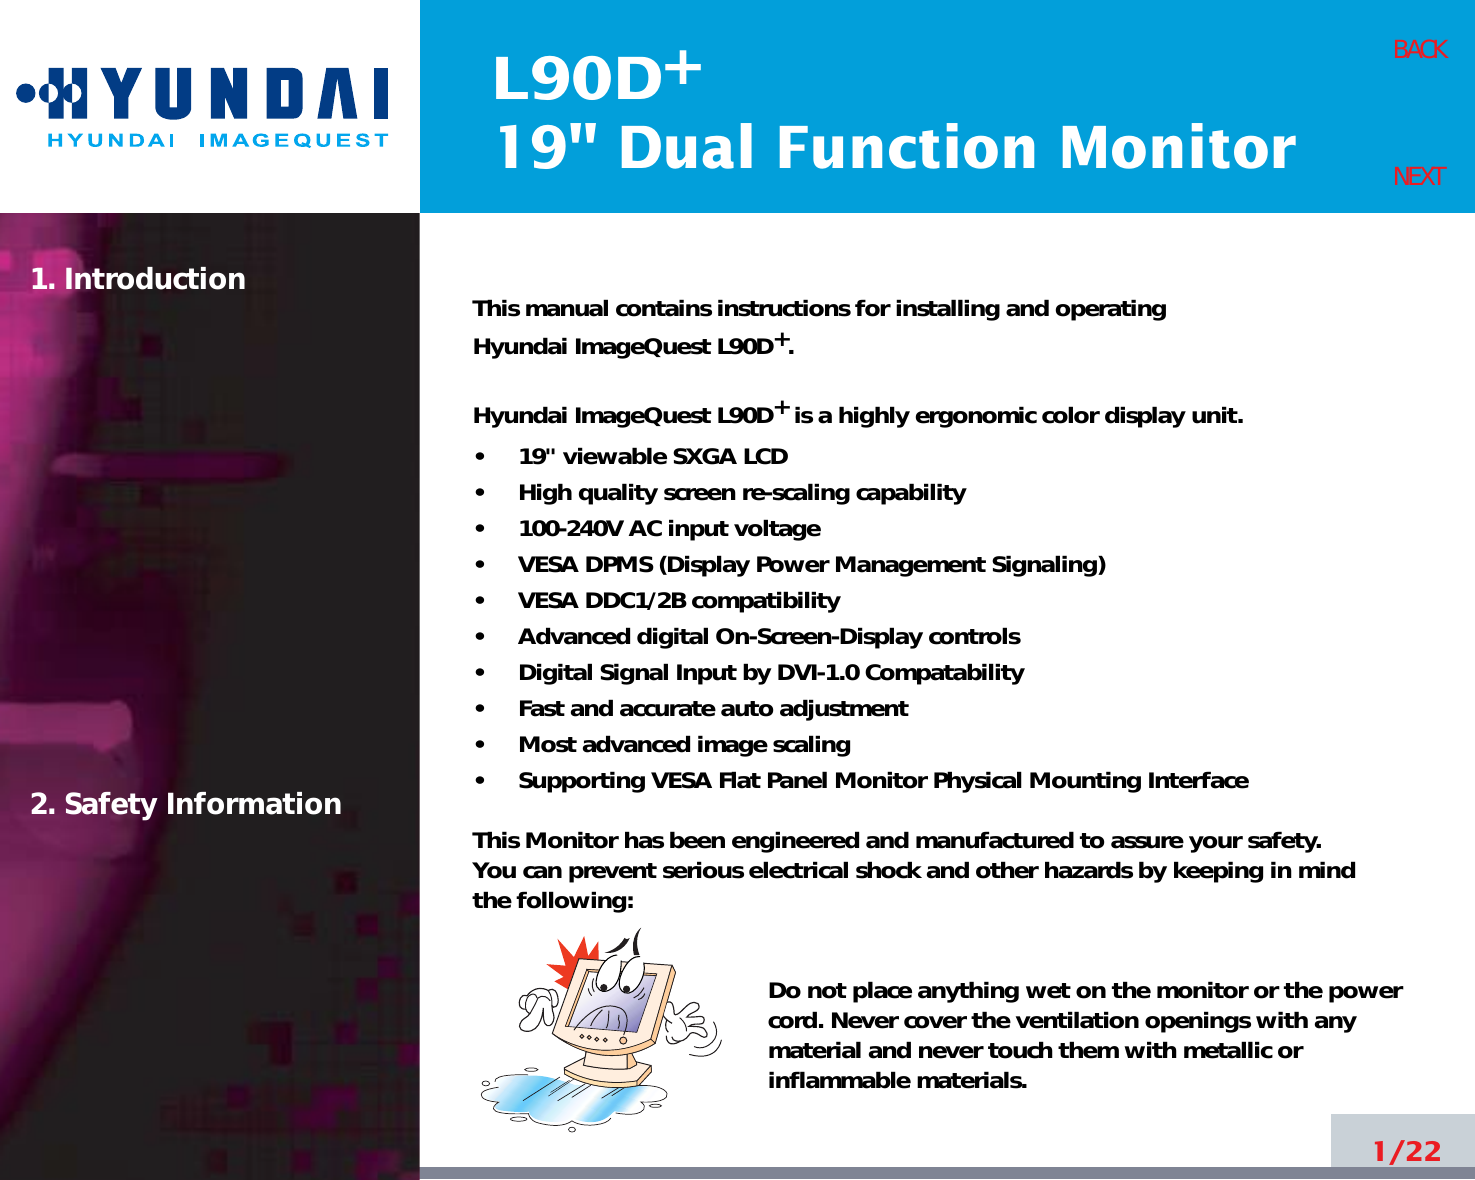 L90D19&quot; Dual Function Monitor+1. Introduction2. Safety Information1/22BACKNEXTThis manual contains instructions for installing and operatingHyundai ImageQuest L90D+.Hyundai ImageQuest L90D+is a highly ergonomic color display unit.•     19&quot; viewable SXGA LCD•     High quality screen re-scaling capability•     100-240V AC input voltage•     VESA DPMS (Display Power Management Signaling)•     VESA DDC1/2B compatibility•     Advanced digital On-Screen-Display controls•     Digital Signal Input by DVI-1.0 Compatability•     Fast and accurate auto adjustment  •     Most advanced image scaling•     Supporting VESA Flat Panel Monitor Physical Mounting InterfaceThis Monitor has been engineered and manufactured to assure your safety. You can prevent serious electrical shock and other hazards by keeping in mind the following:Do not place anything wet on the monitor or the powercord. Never cover the ventilation openings with anymaterial and never touch them with metallic or inflammable materials.